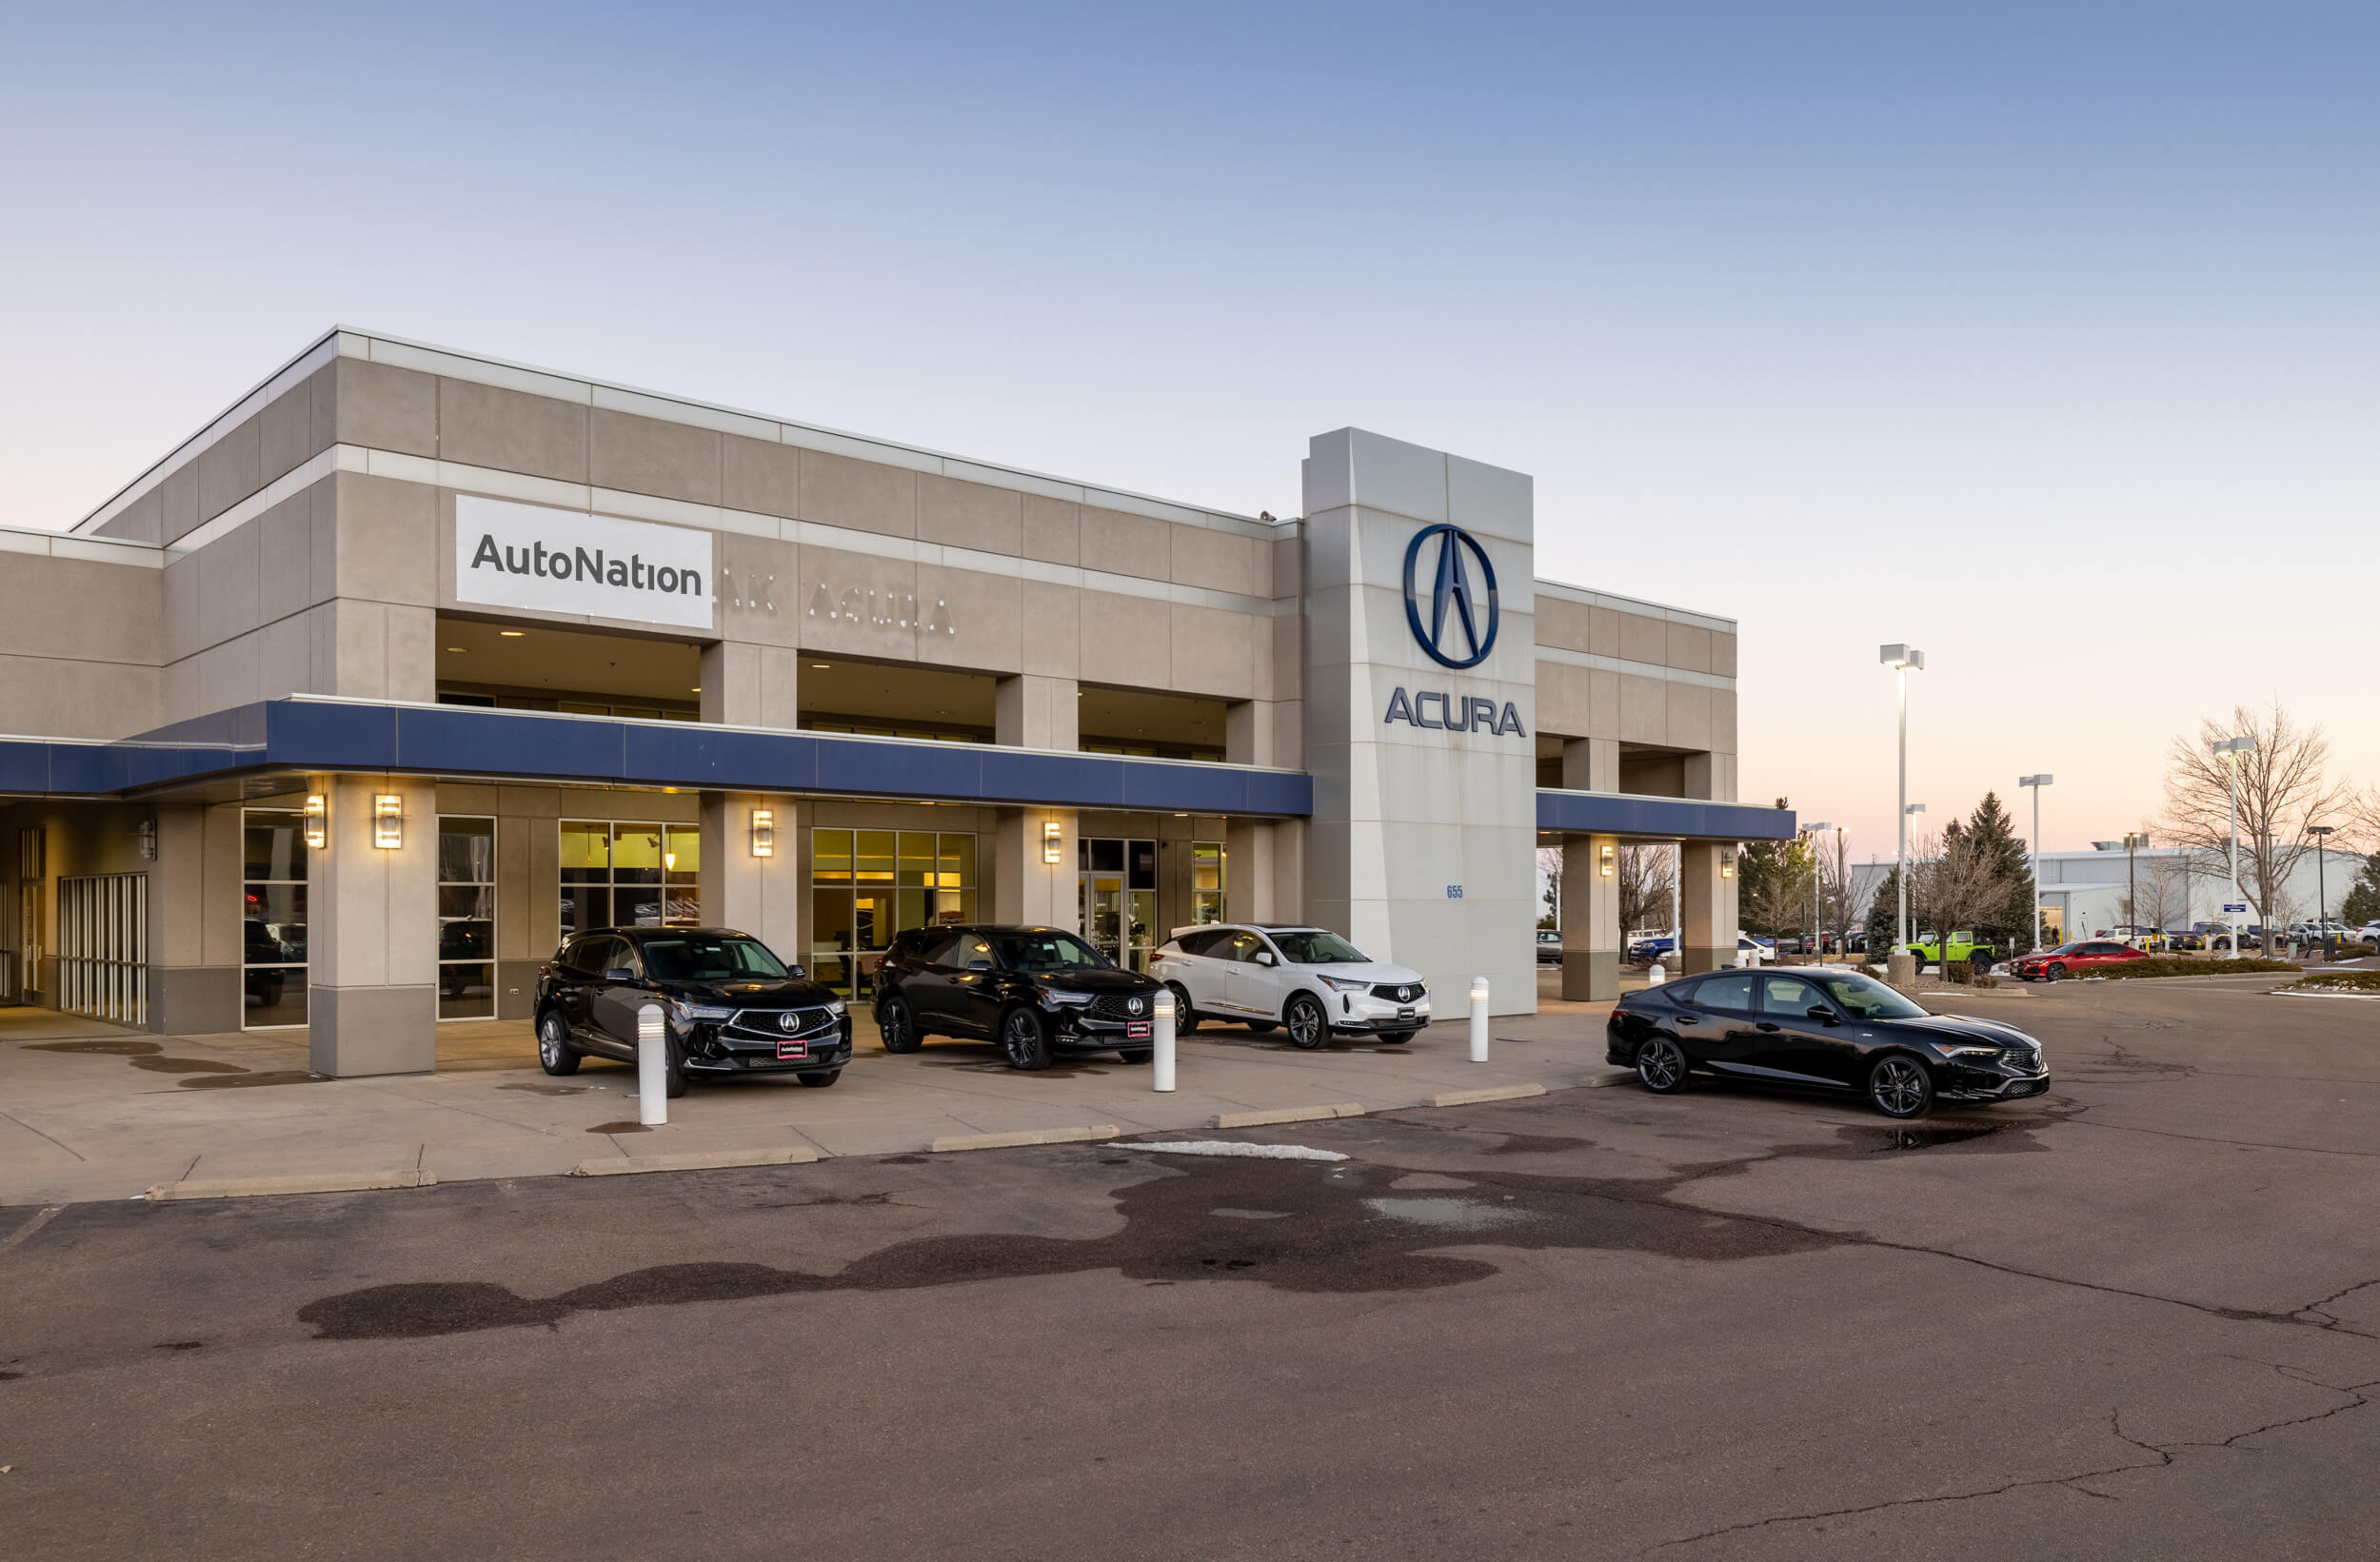 Exterior view of front of AutoNation Acura Colorado Springs with some cars parked in front on display. Clear sky in what appears to be the morning